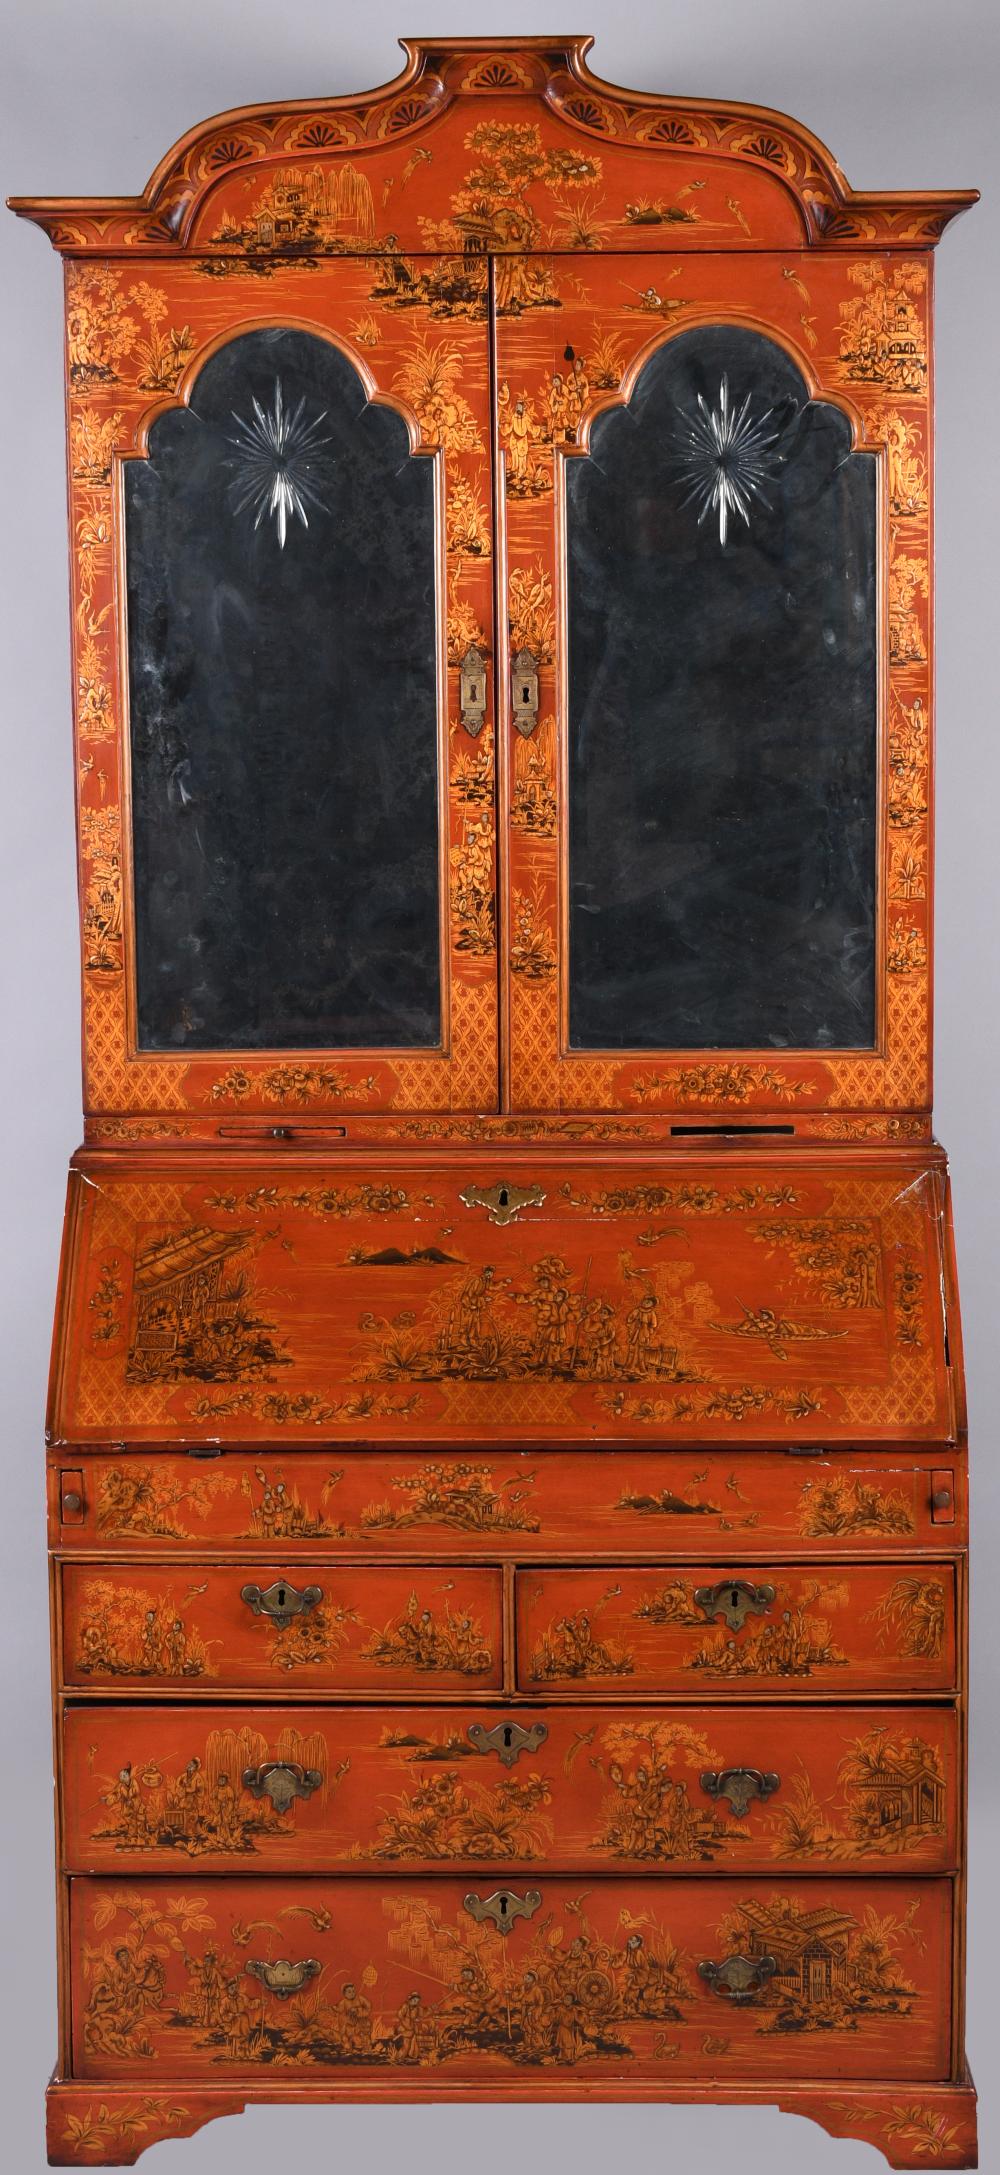 GEORGE I STYLE CHINOISERIE DECORATED